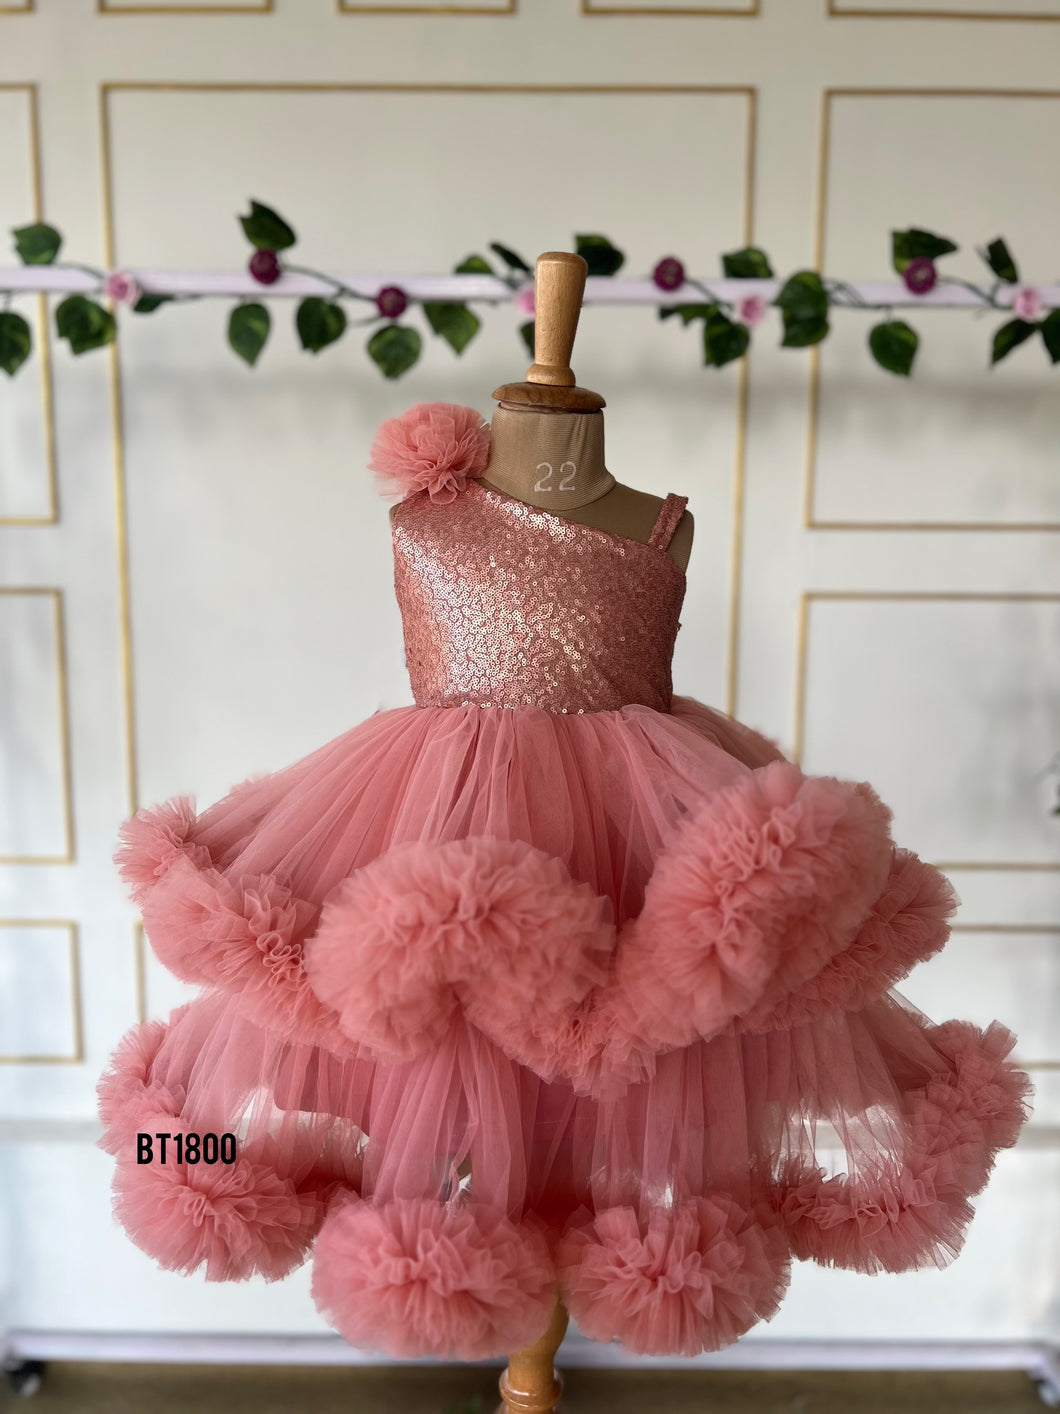 BT1800 Enchanted Pink Princess Gown - Baby Party Wear